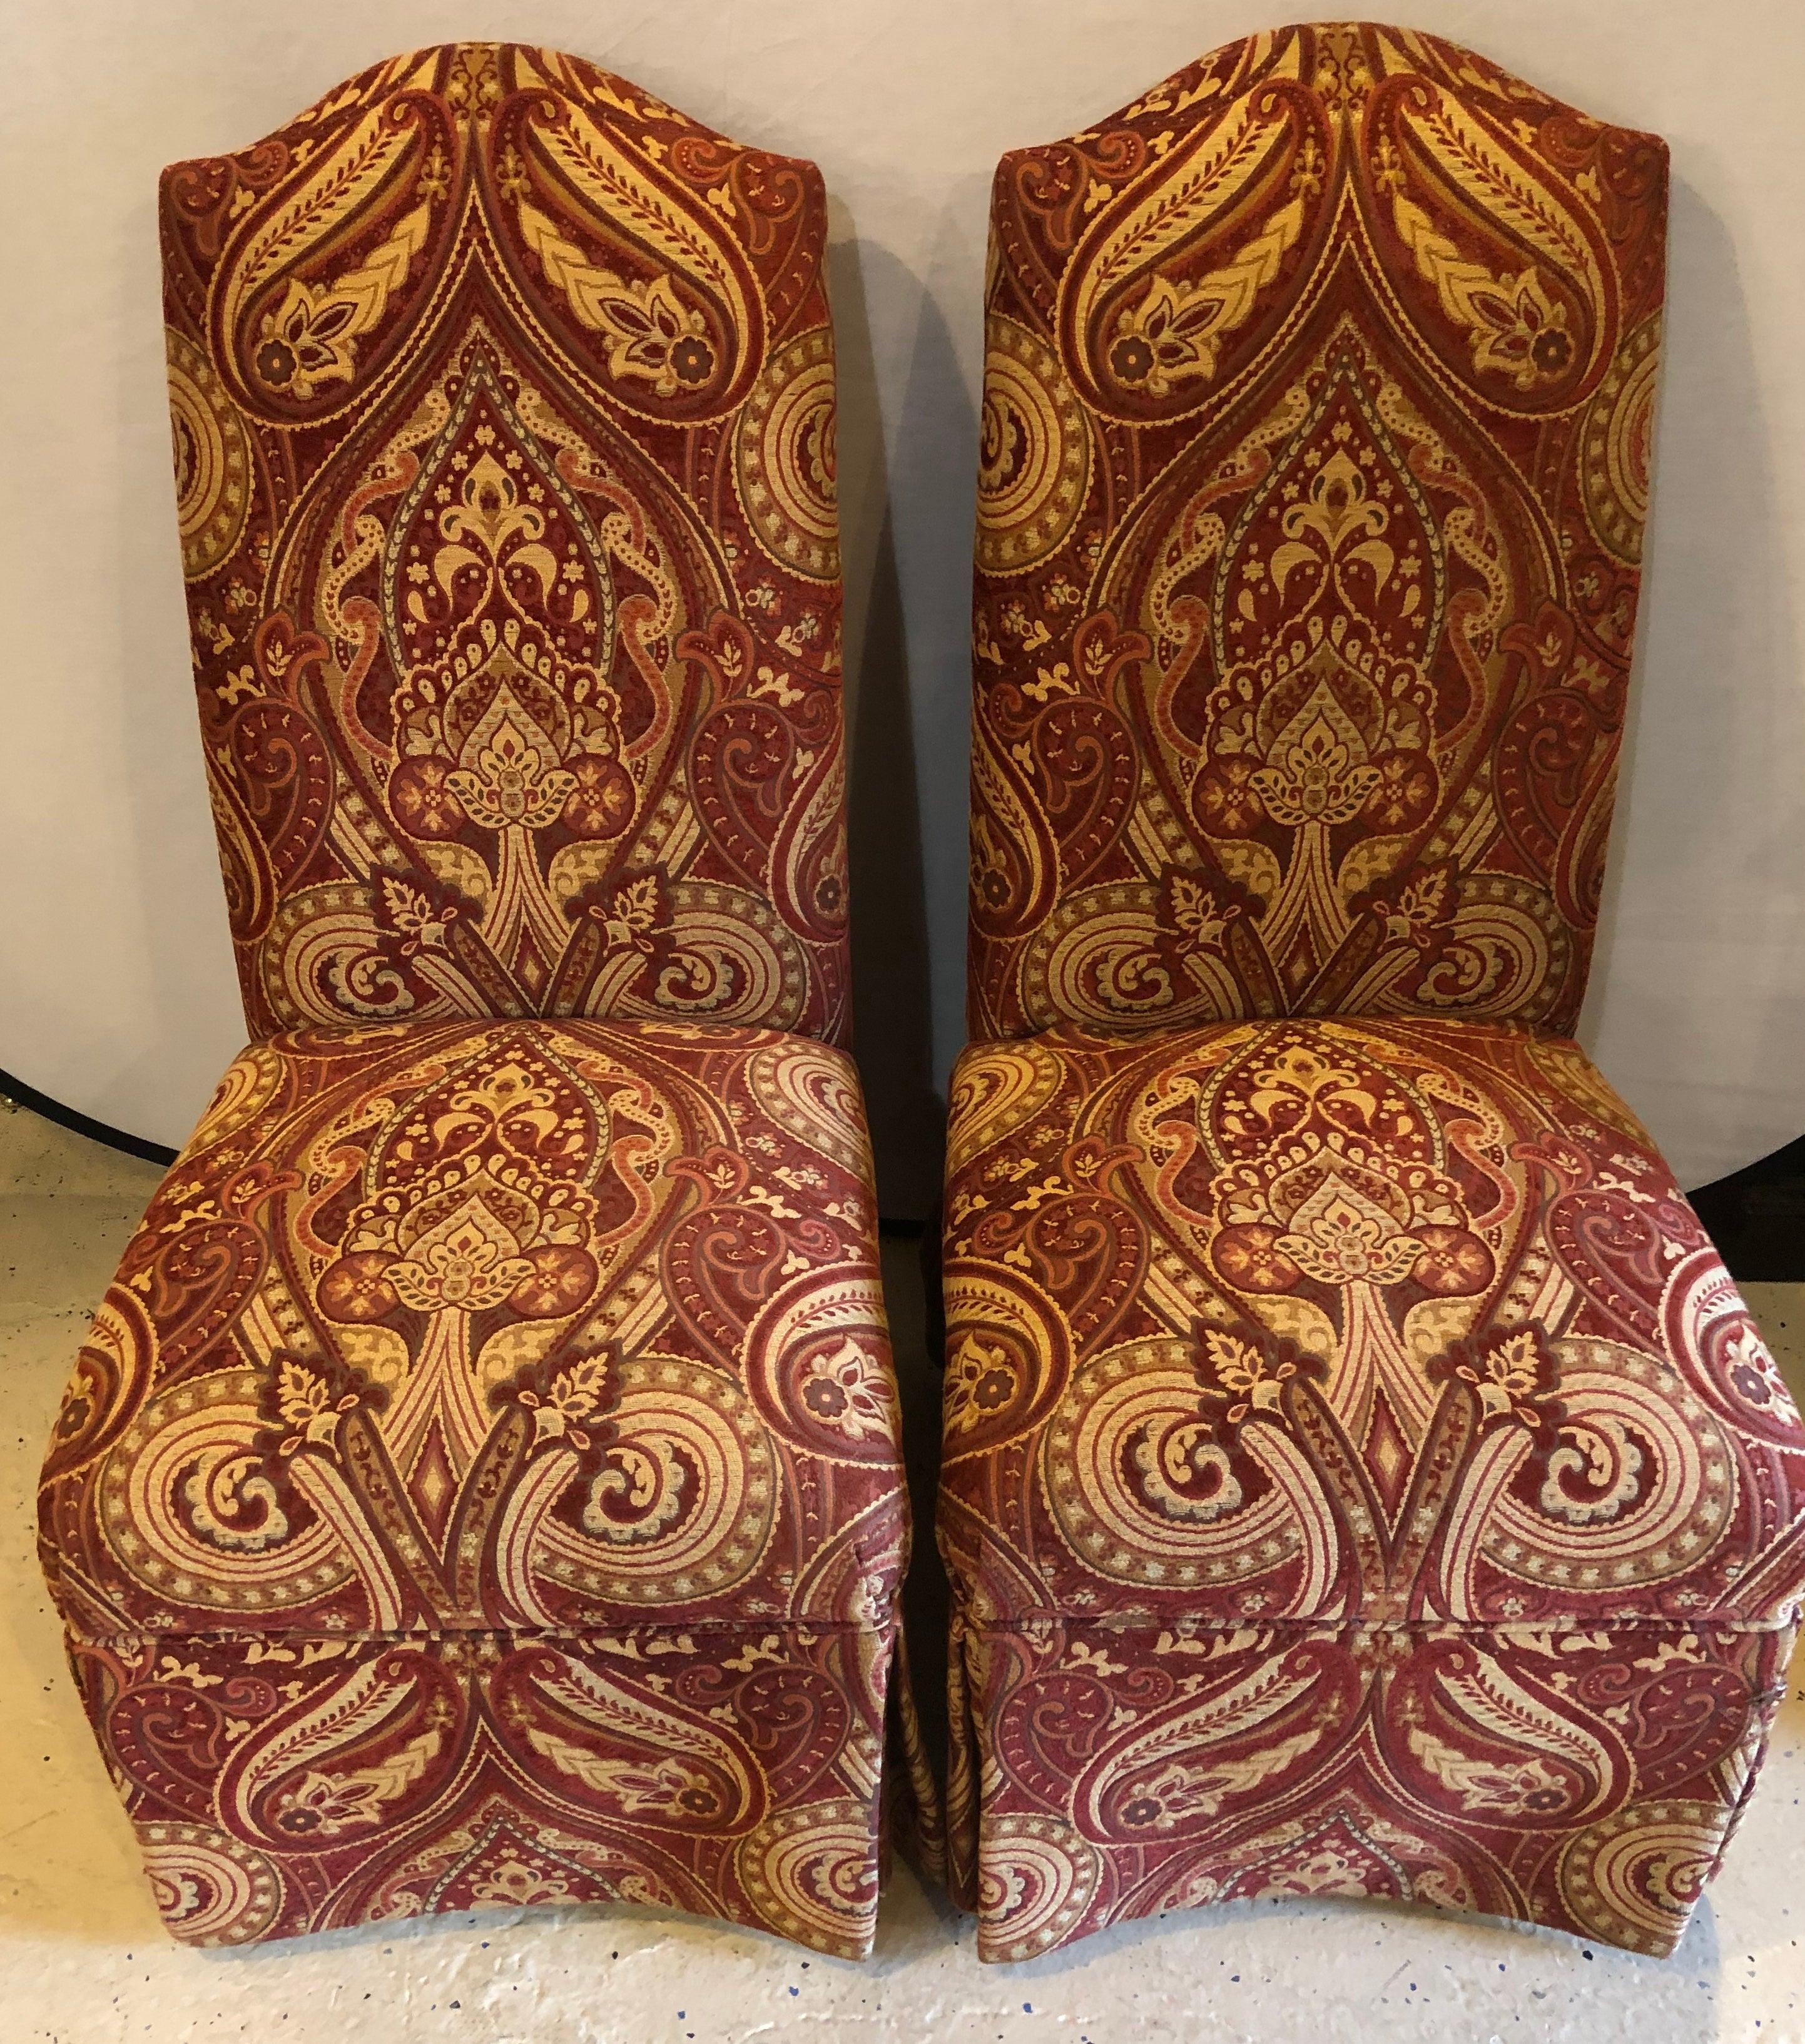 Drexel Heritage Side Chair in Burgundy & a Fine Upholstery, a Pair 
An elegant pair of Drexel Heritage side chairs that will look prefect in an office or used as desk chairs or in a living room. The pair of chairs features a fine upholstery in an